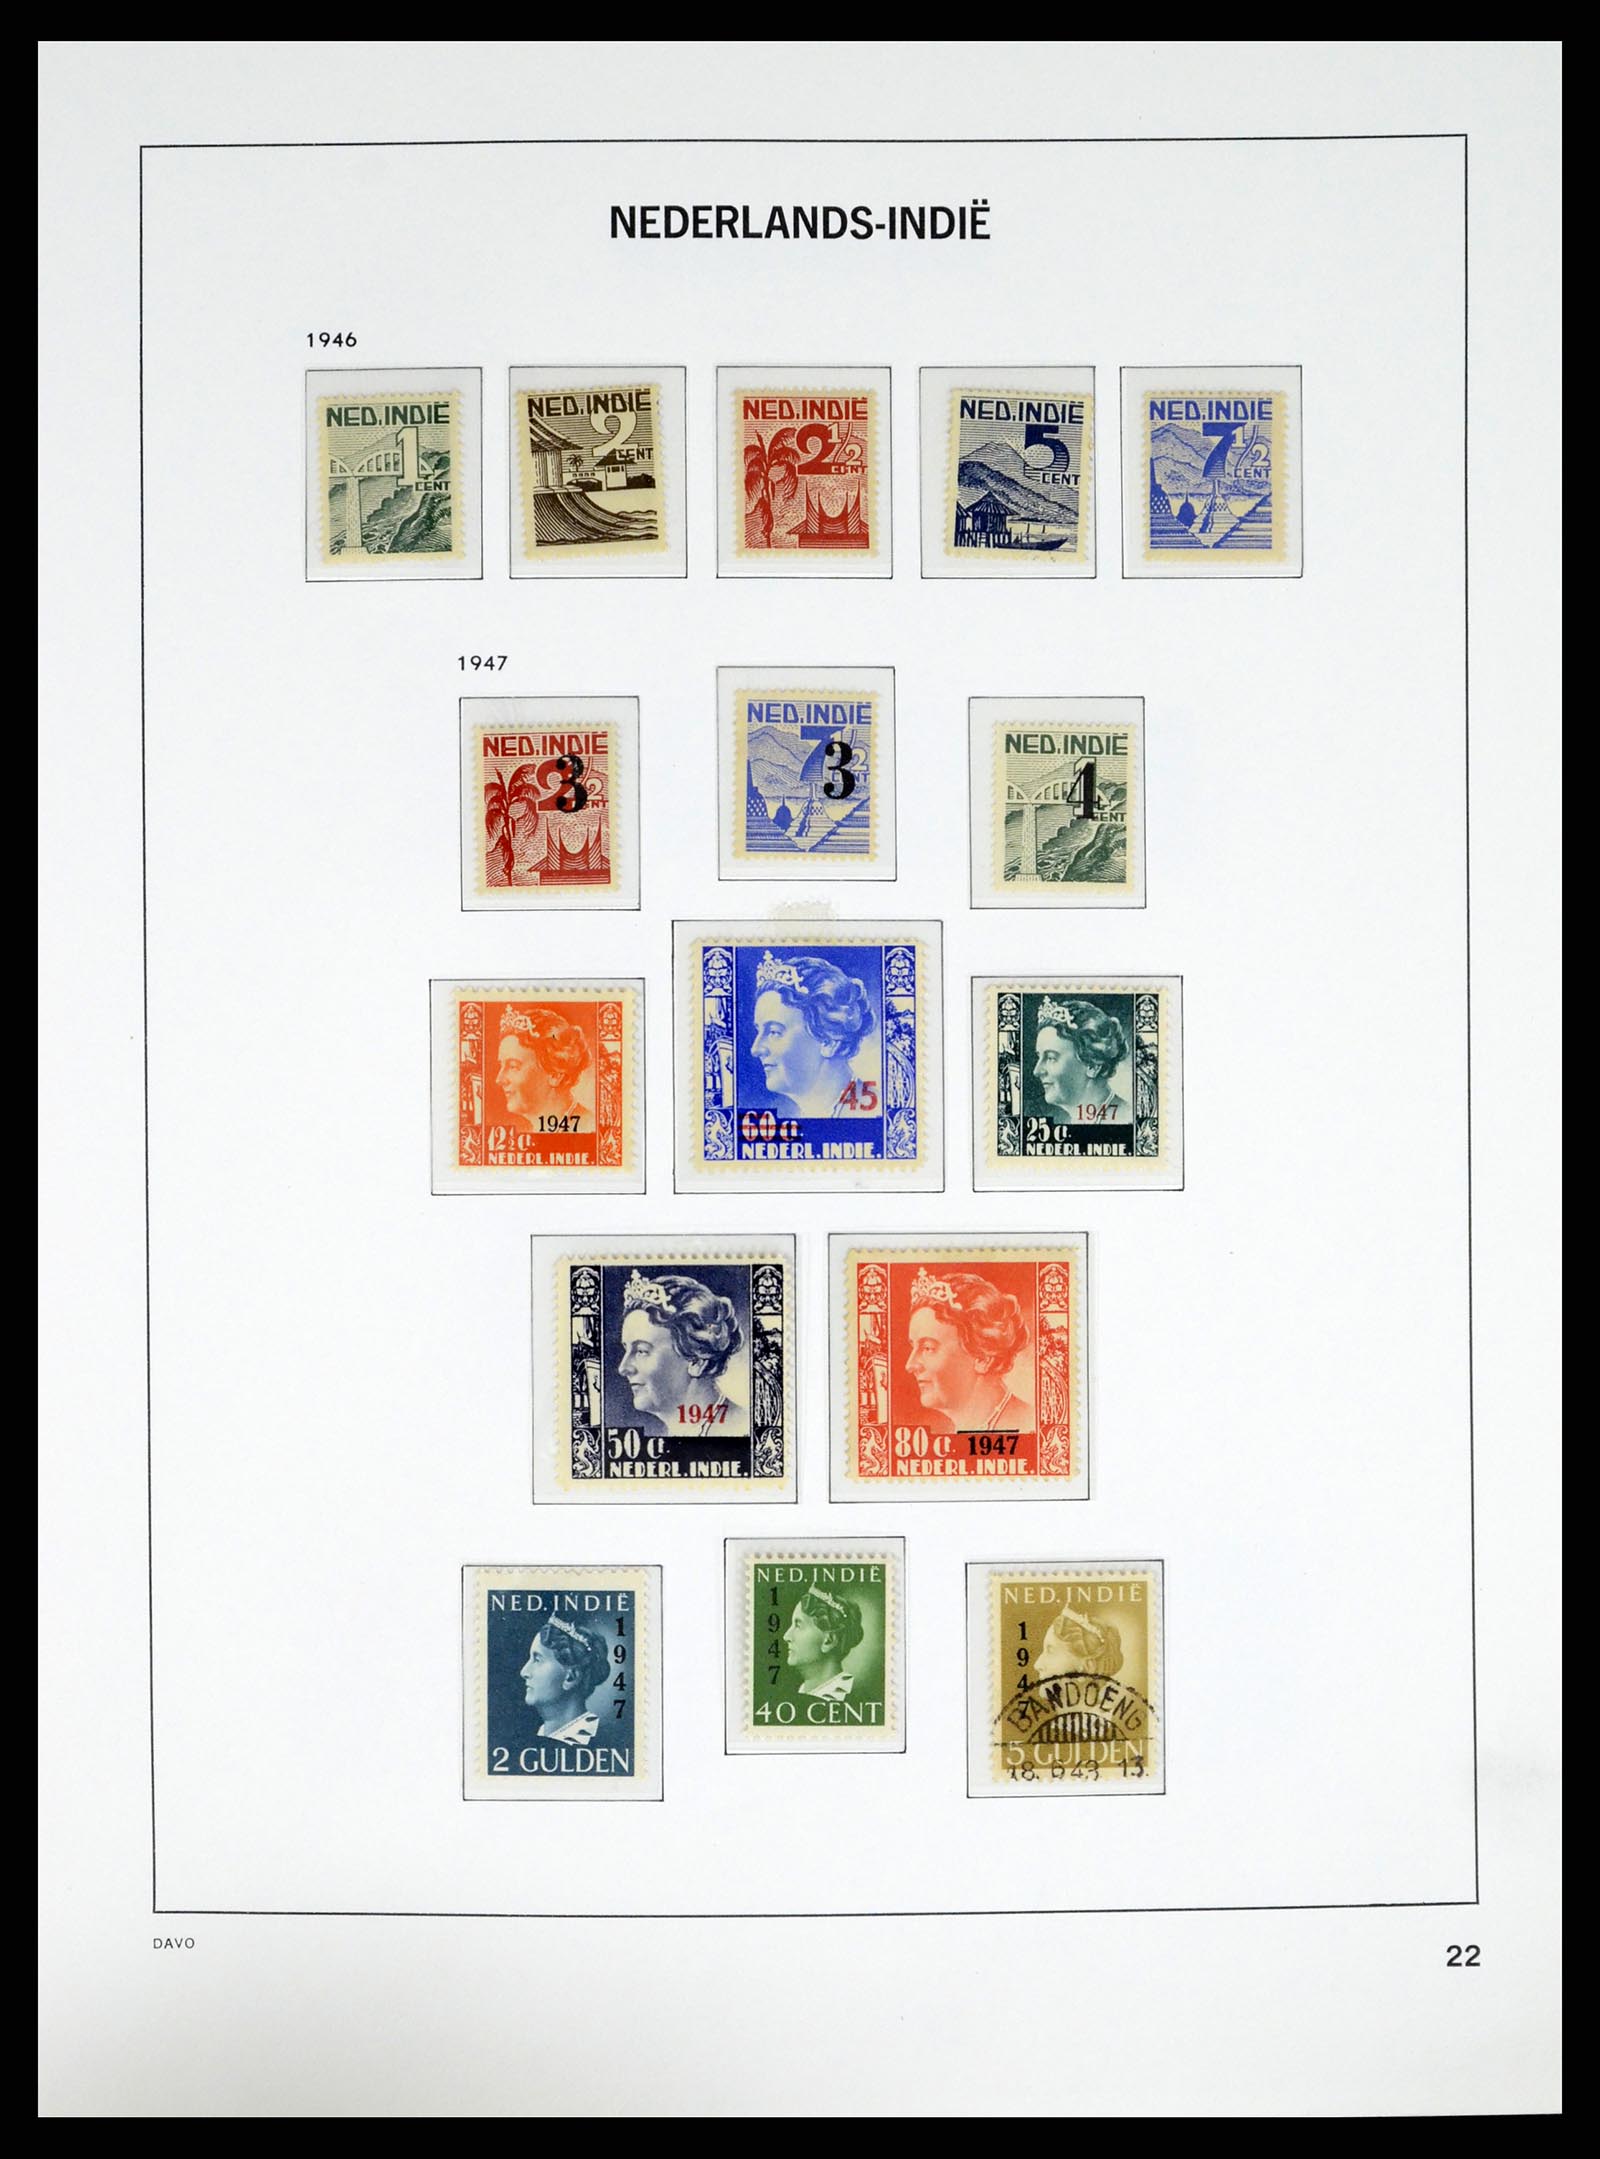 37332 022 - Stamp collection 37332 Dutch East Indies 1864-1949.